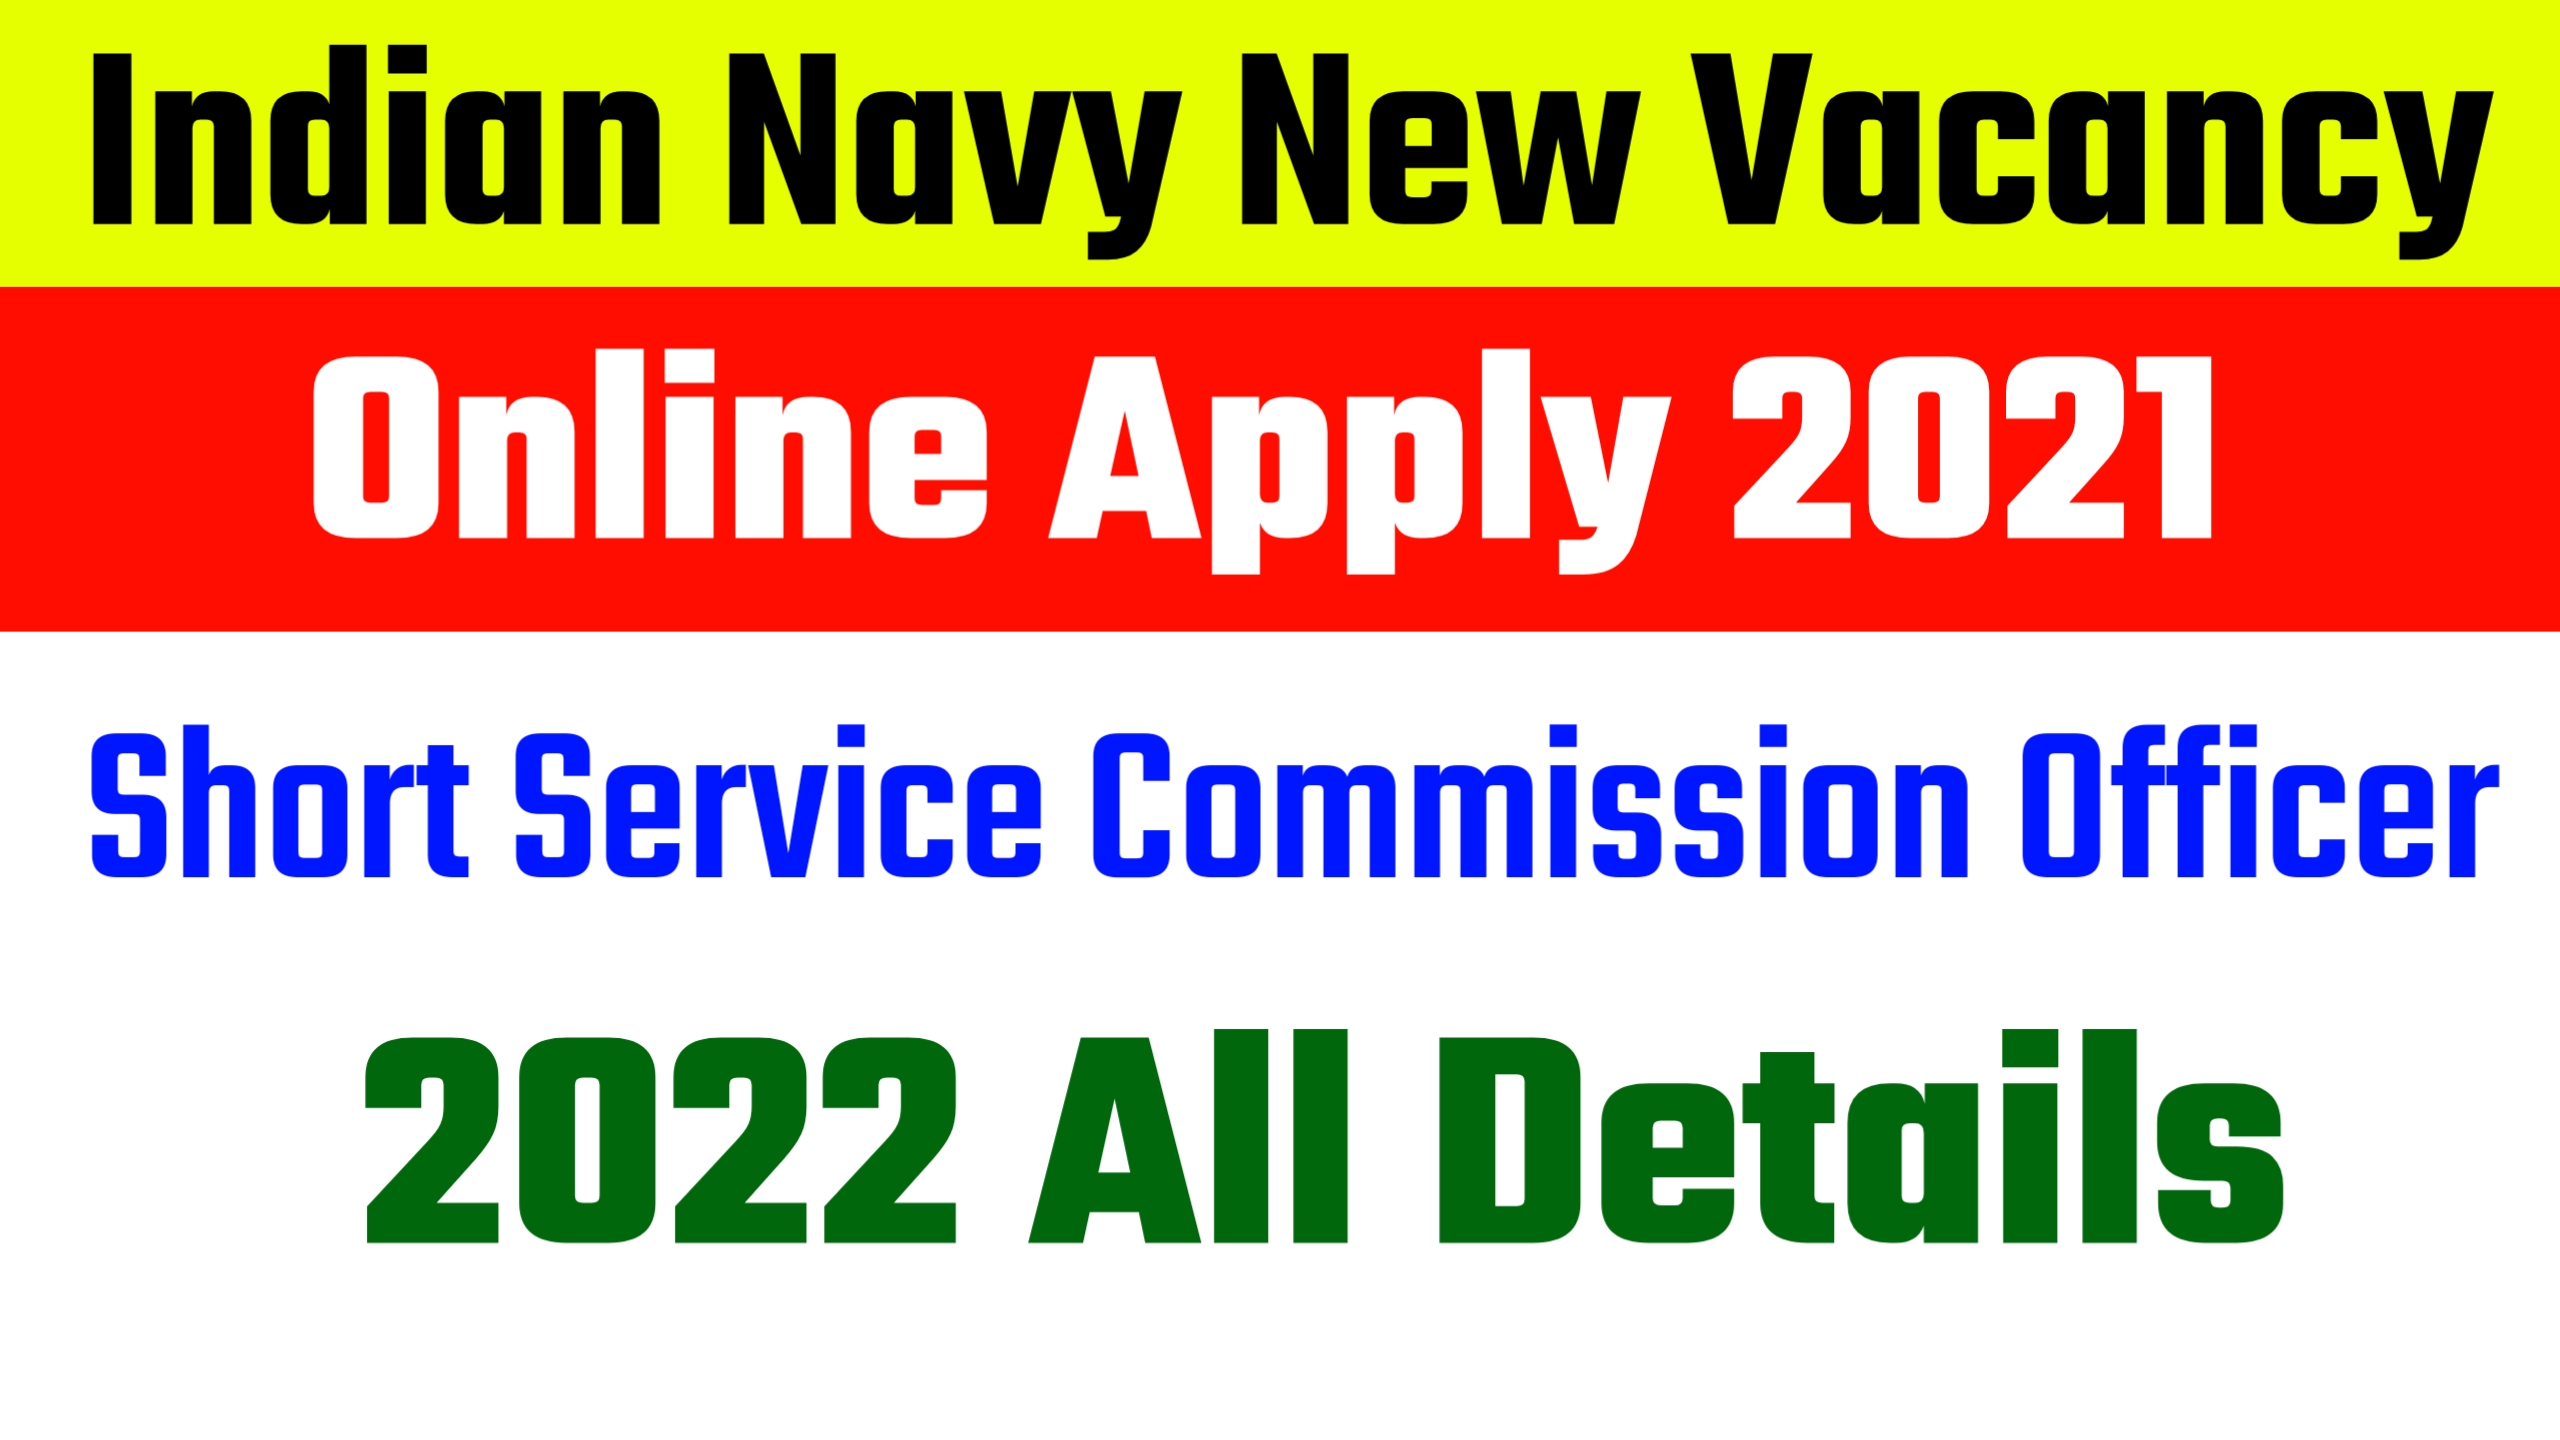 Indian Navy Short Service Commission Officer SSCO Online Form Apply 2021